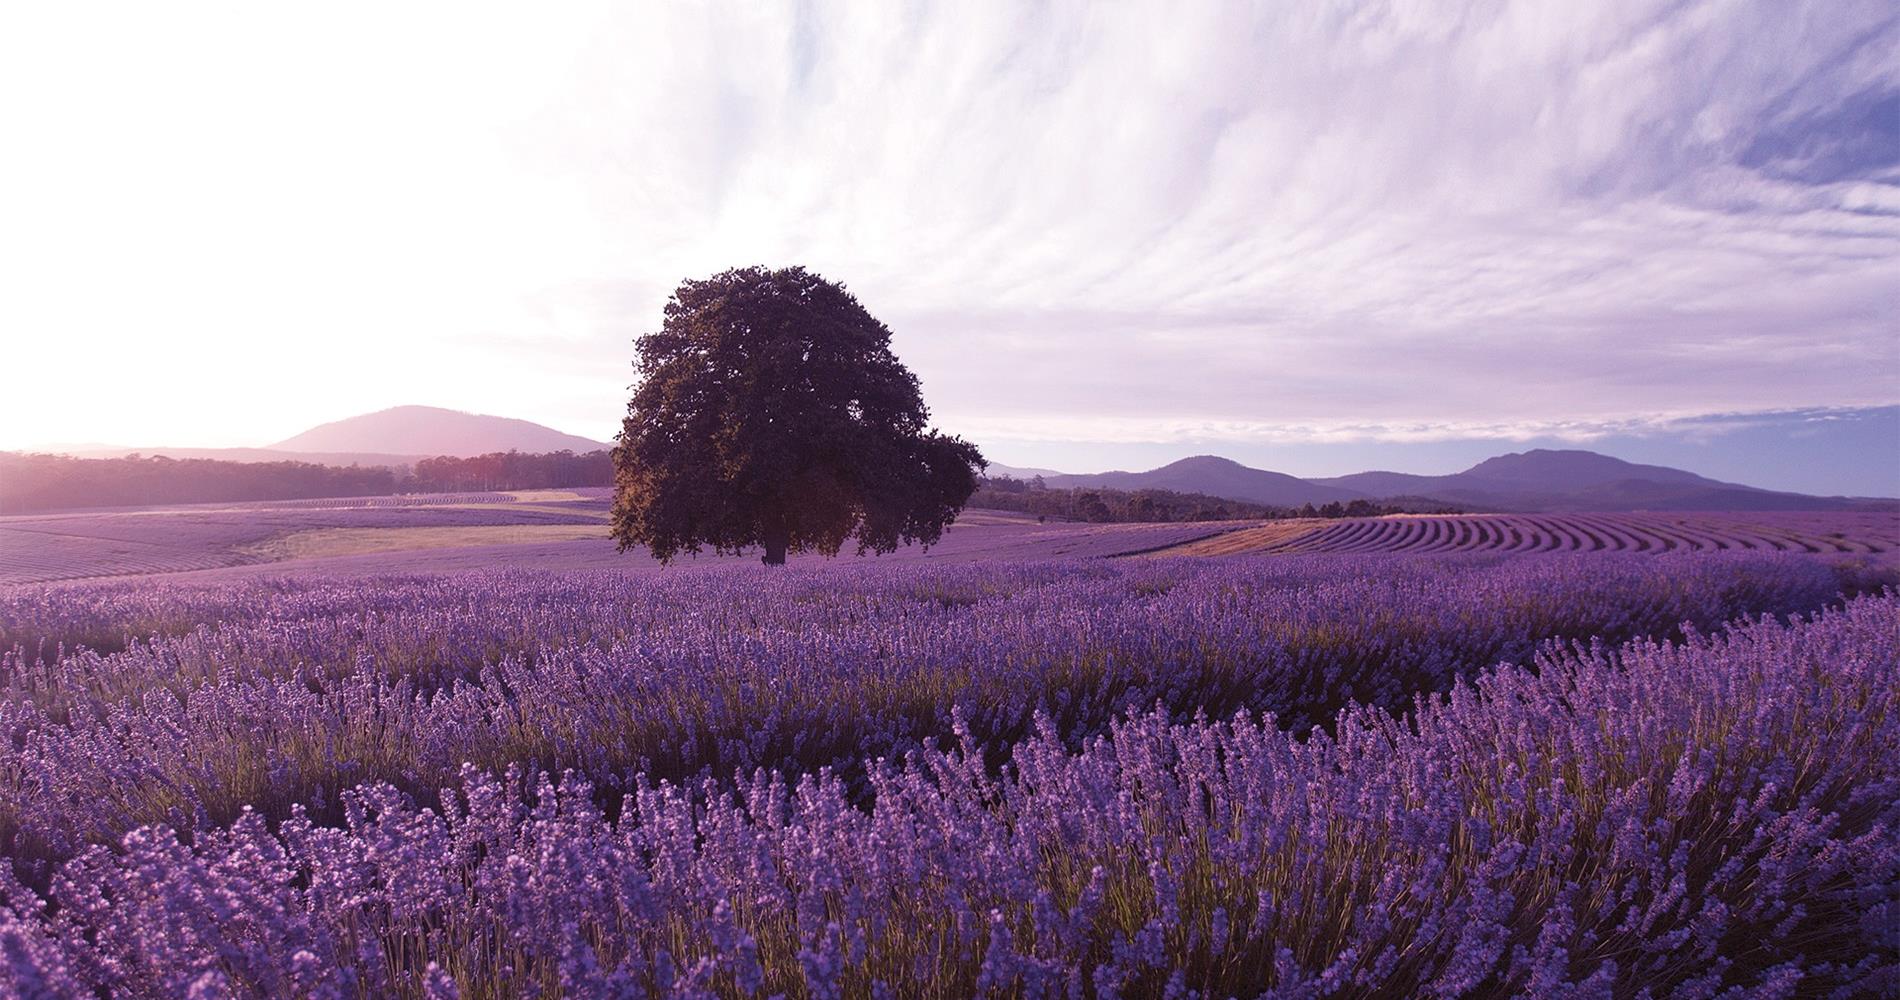 Be amazed at the beautiful sight and smell of the lavender fields of Tasmania with APT.